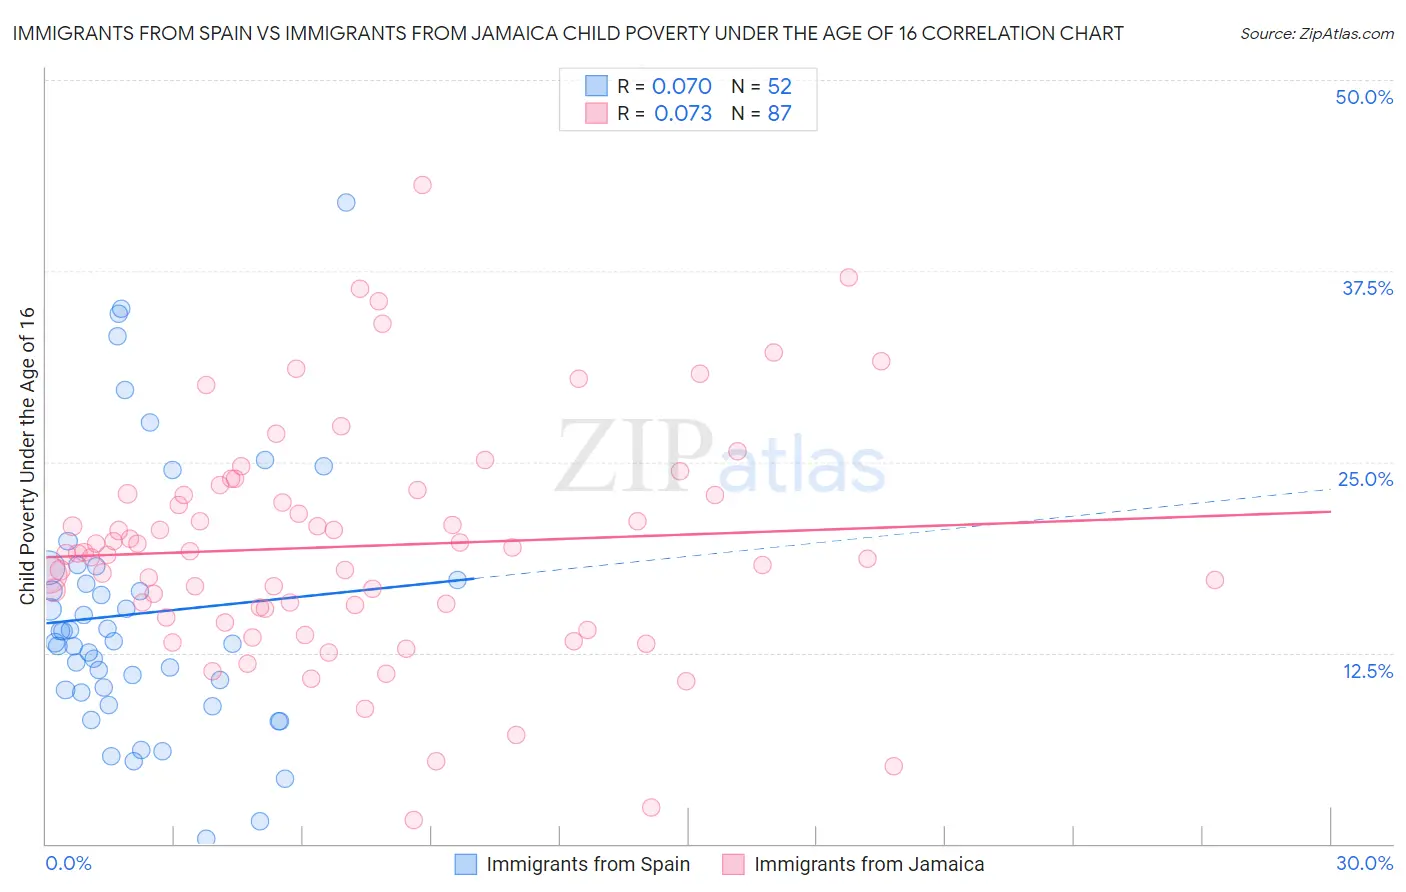 Immigrants from Spain vs Immigrants from Jamaica Child Poverty Under the Age of 16